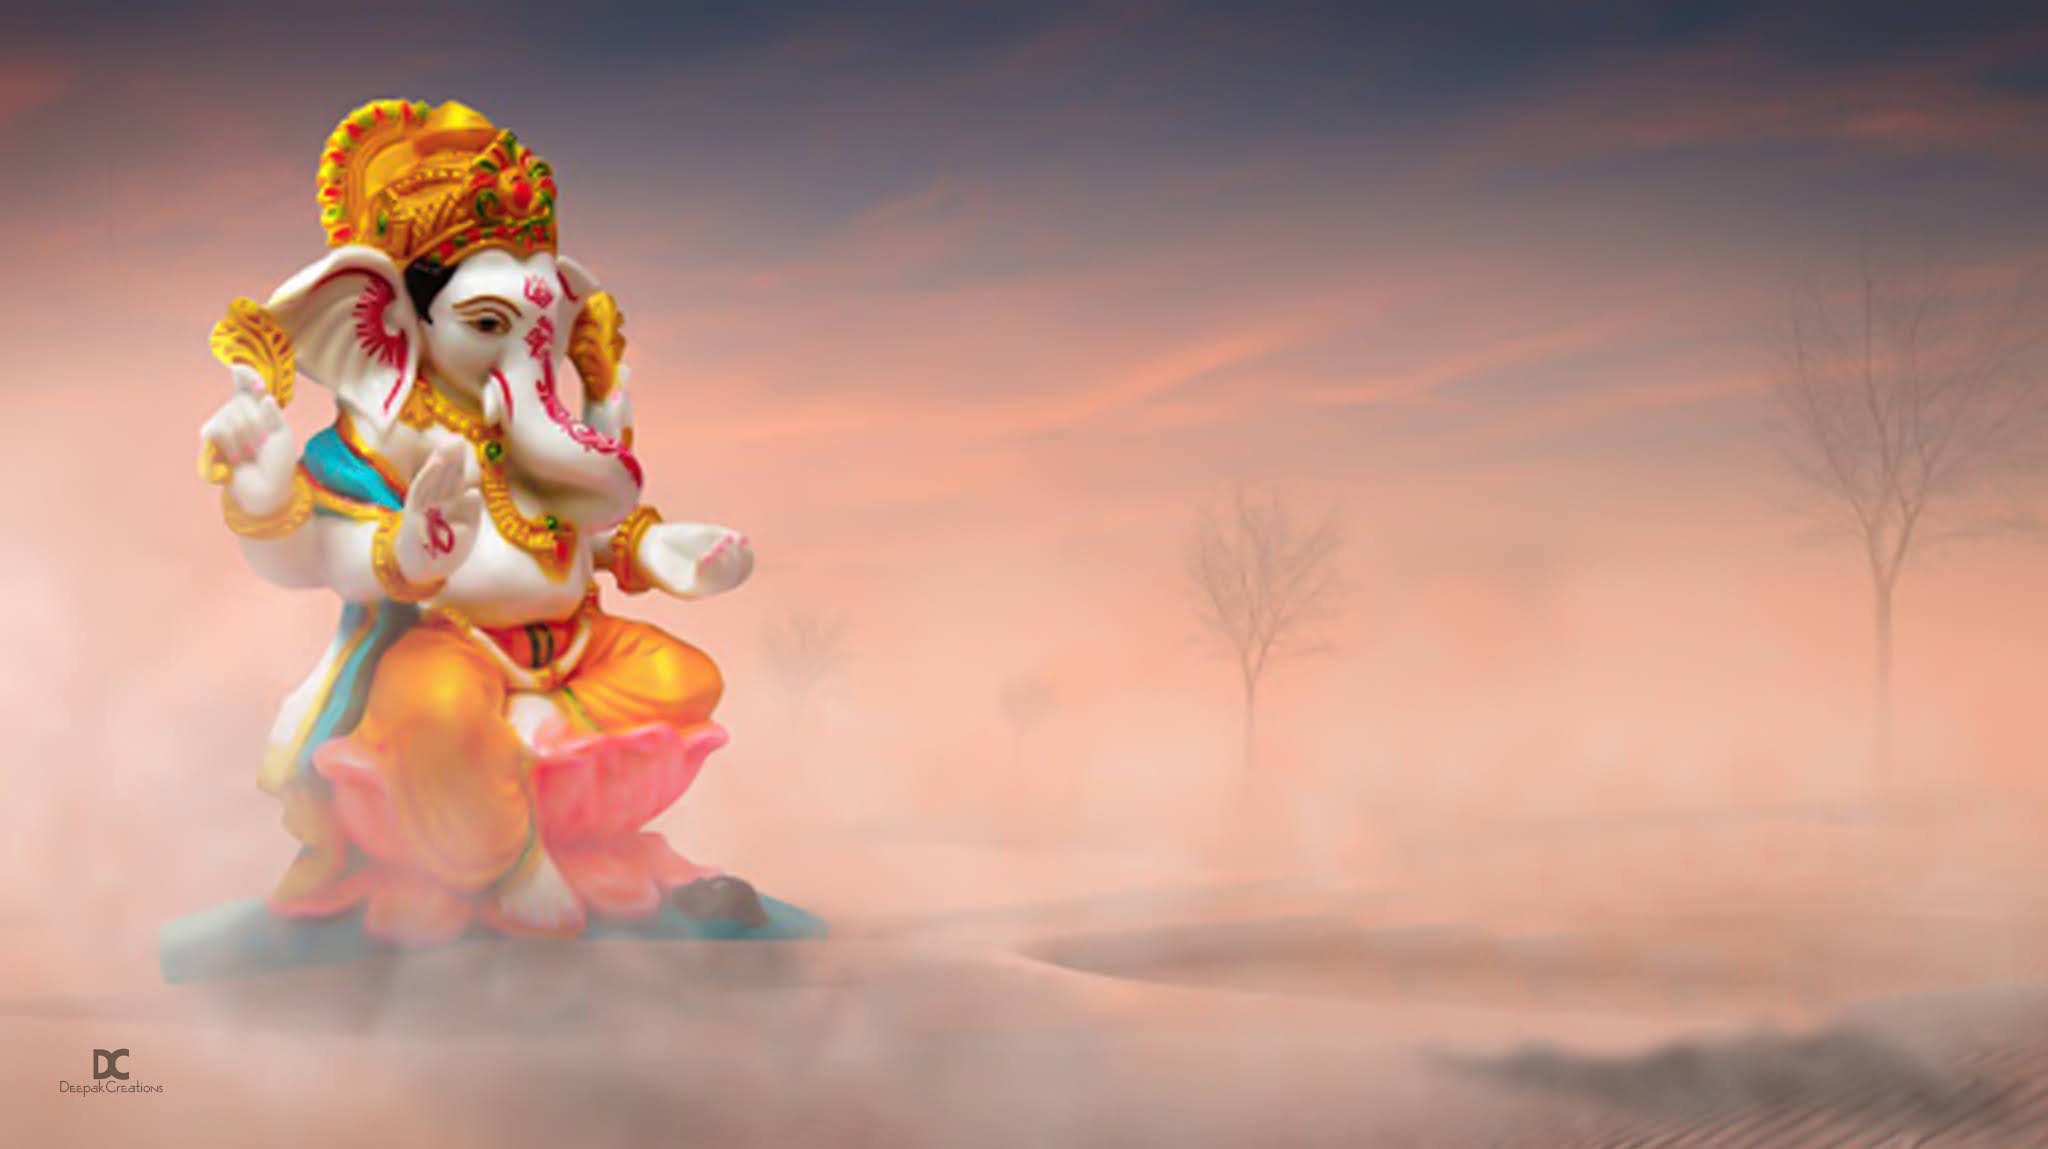 Ganesh Chaturthi HD Backgrounds For Photo Editing - Ganesh Pooja Backgrounds  Download